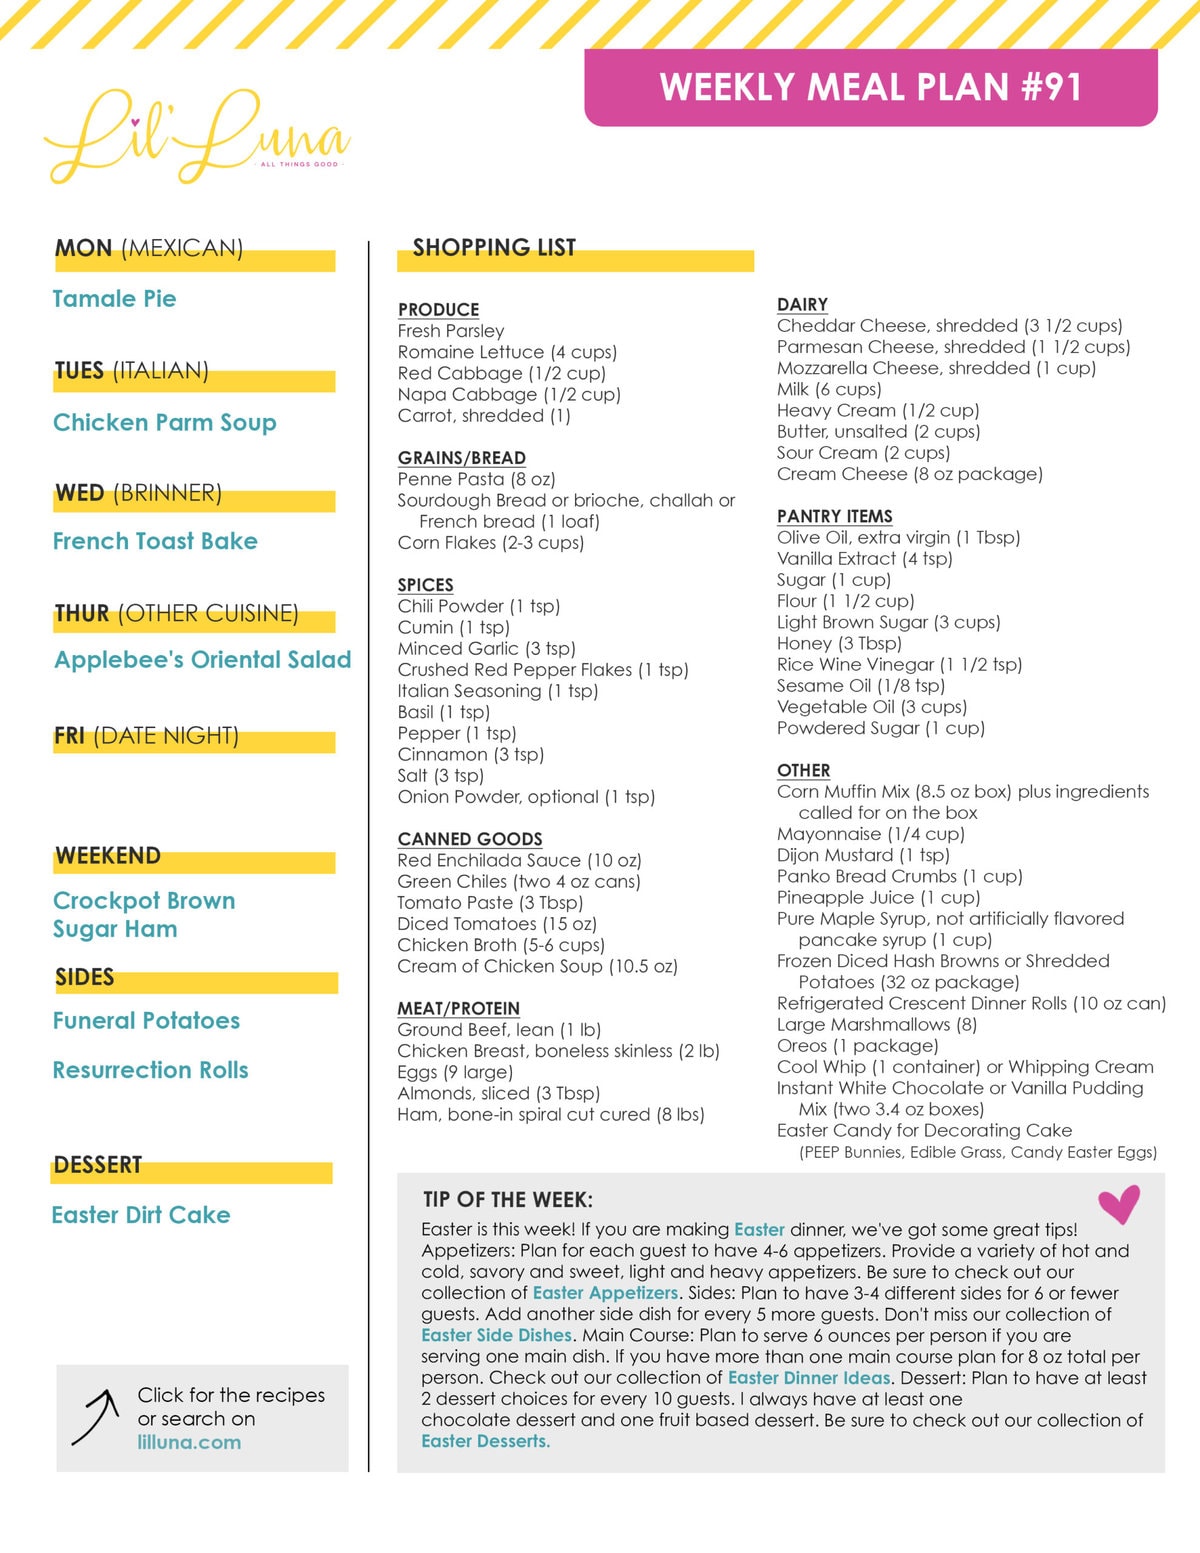 Printable version of Meal Plan #91 with grocery list.